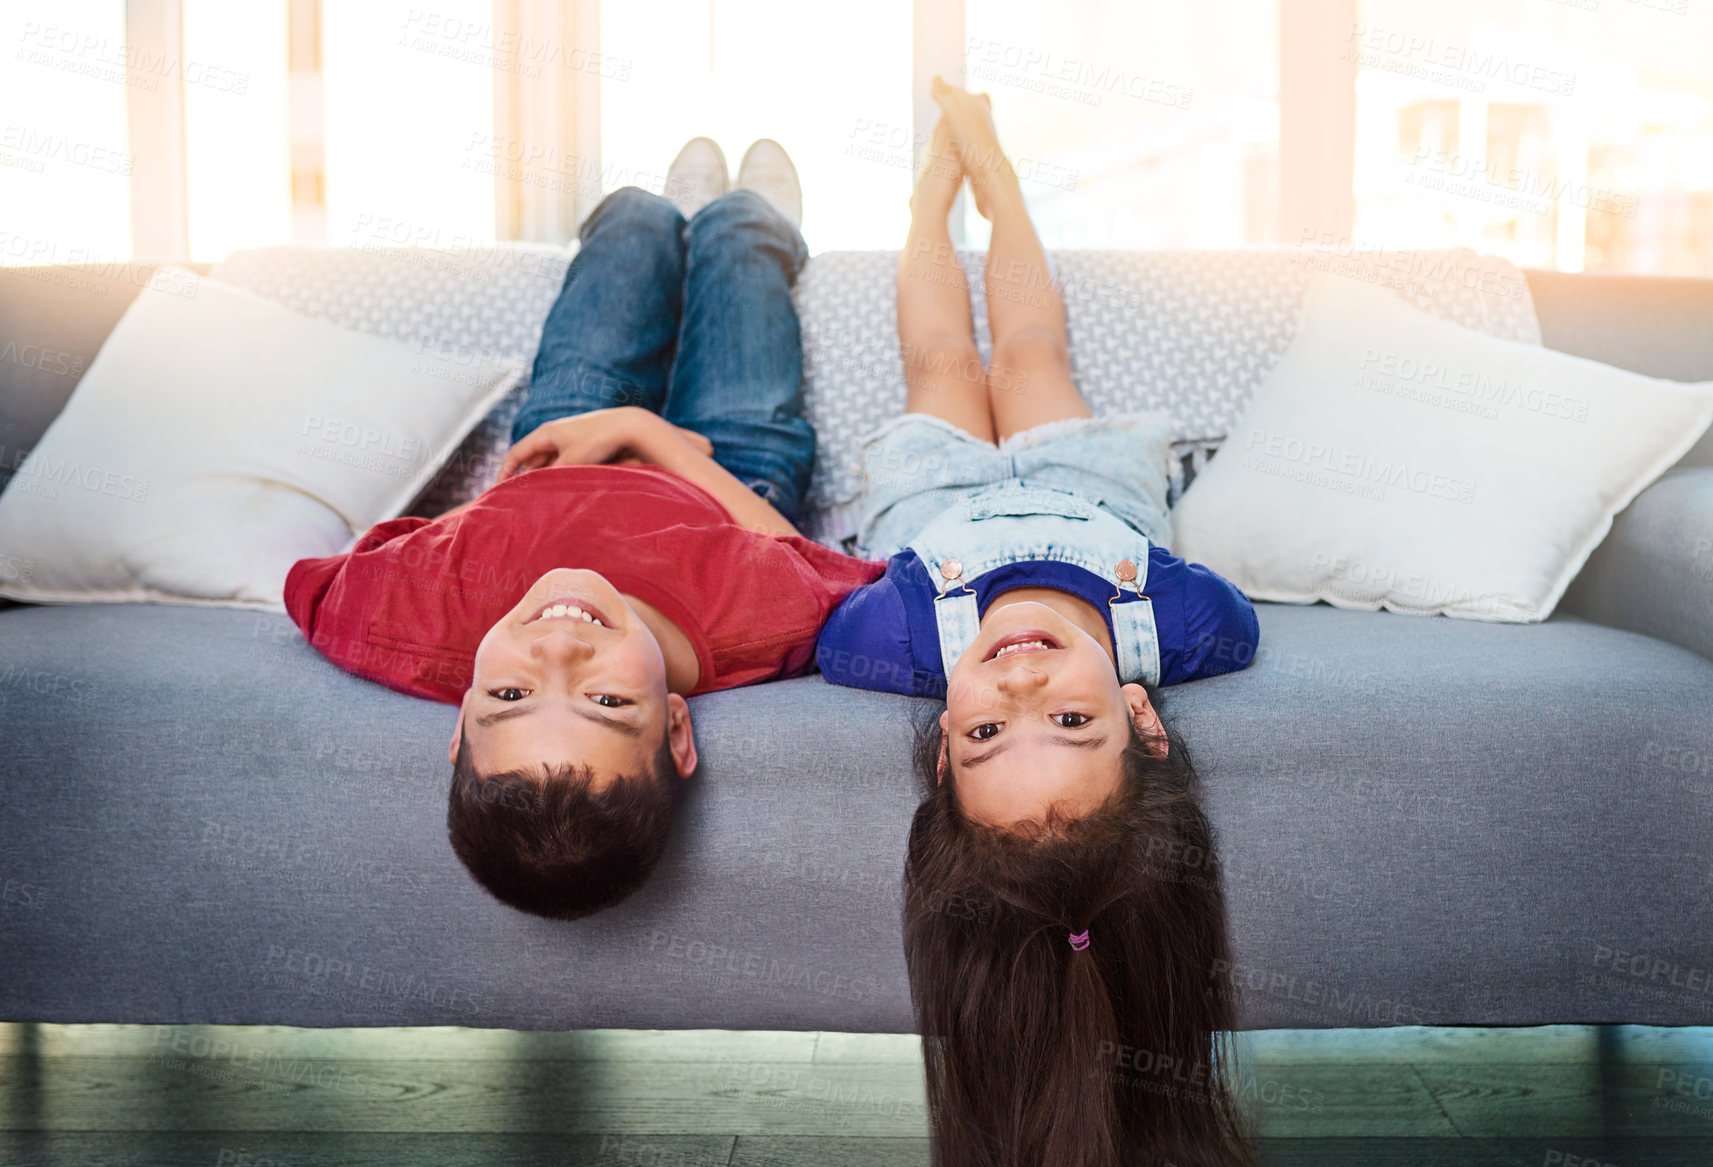 Buy stock photo Portrait of two young children lying upside down on a couch at home